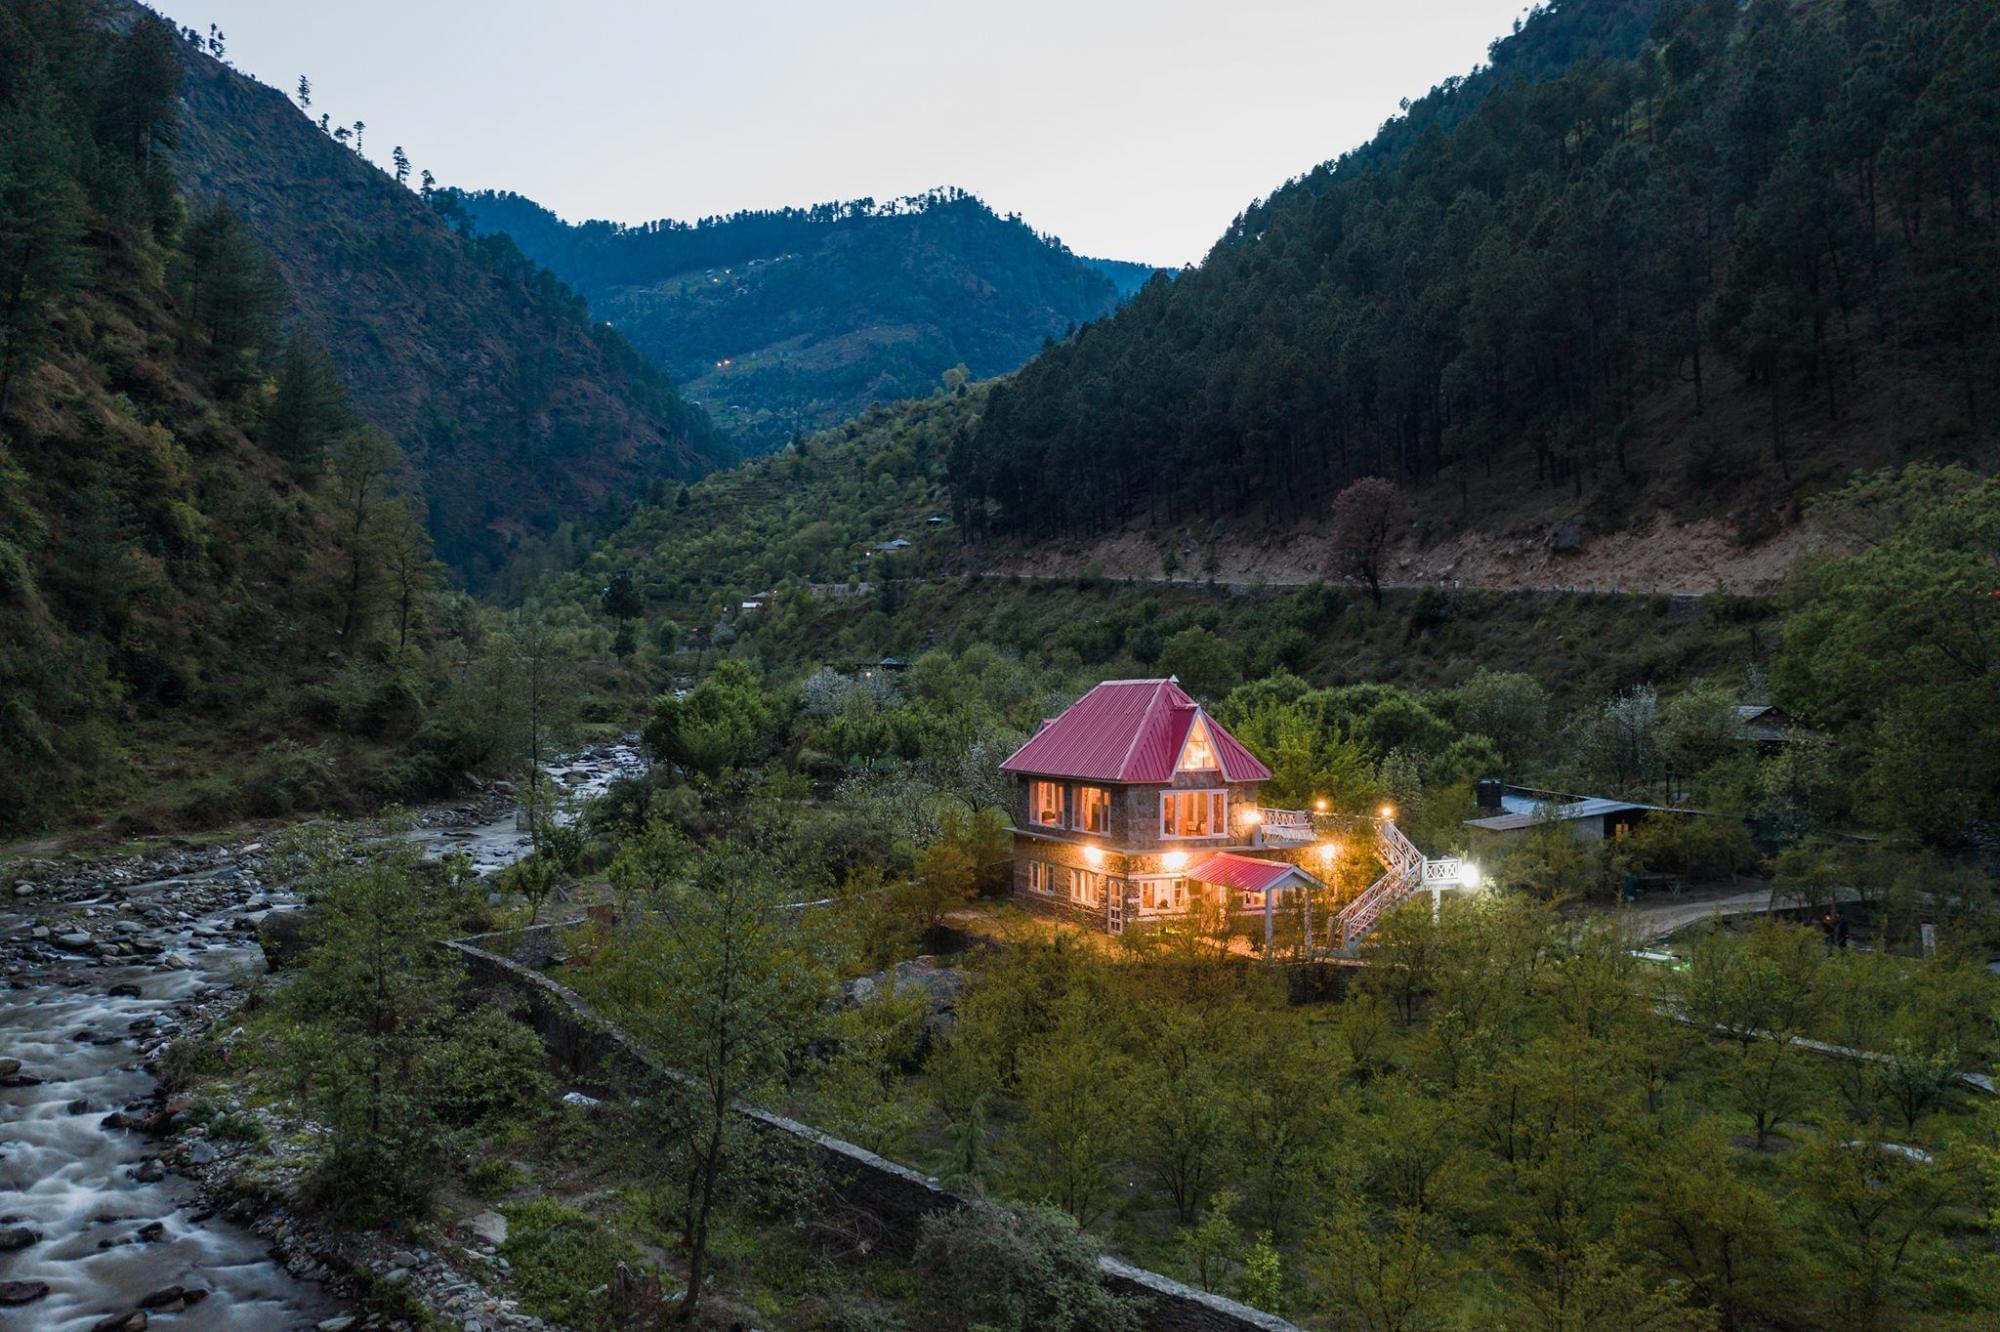 Mcleodganj : Steal Deals on Staycations